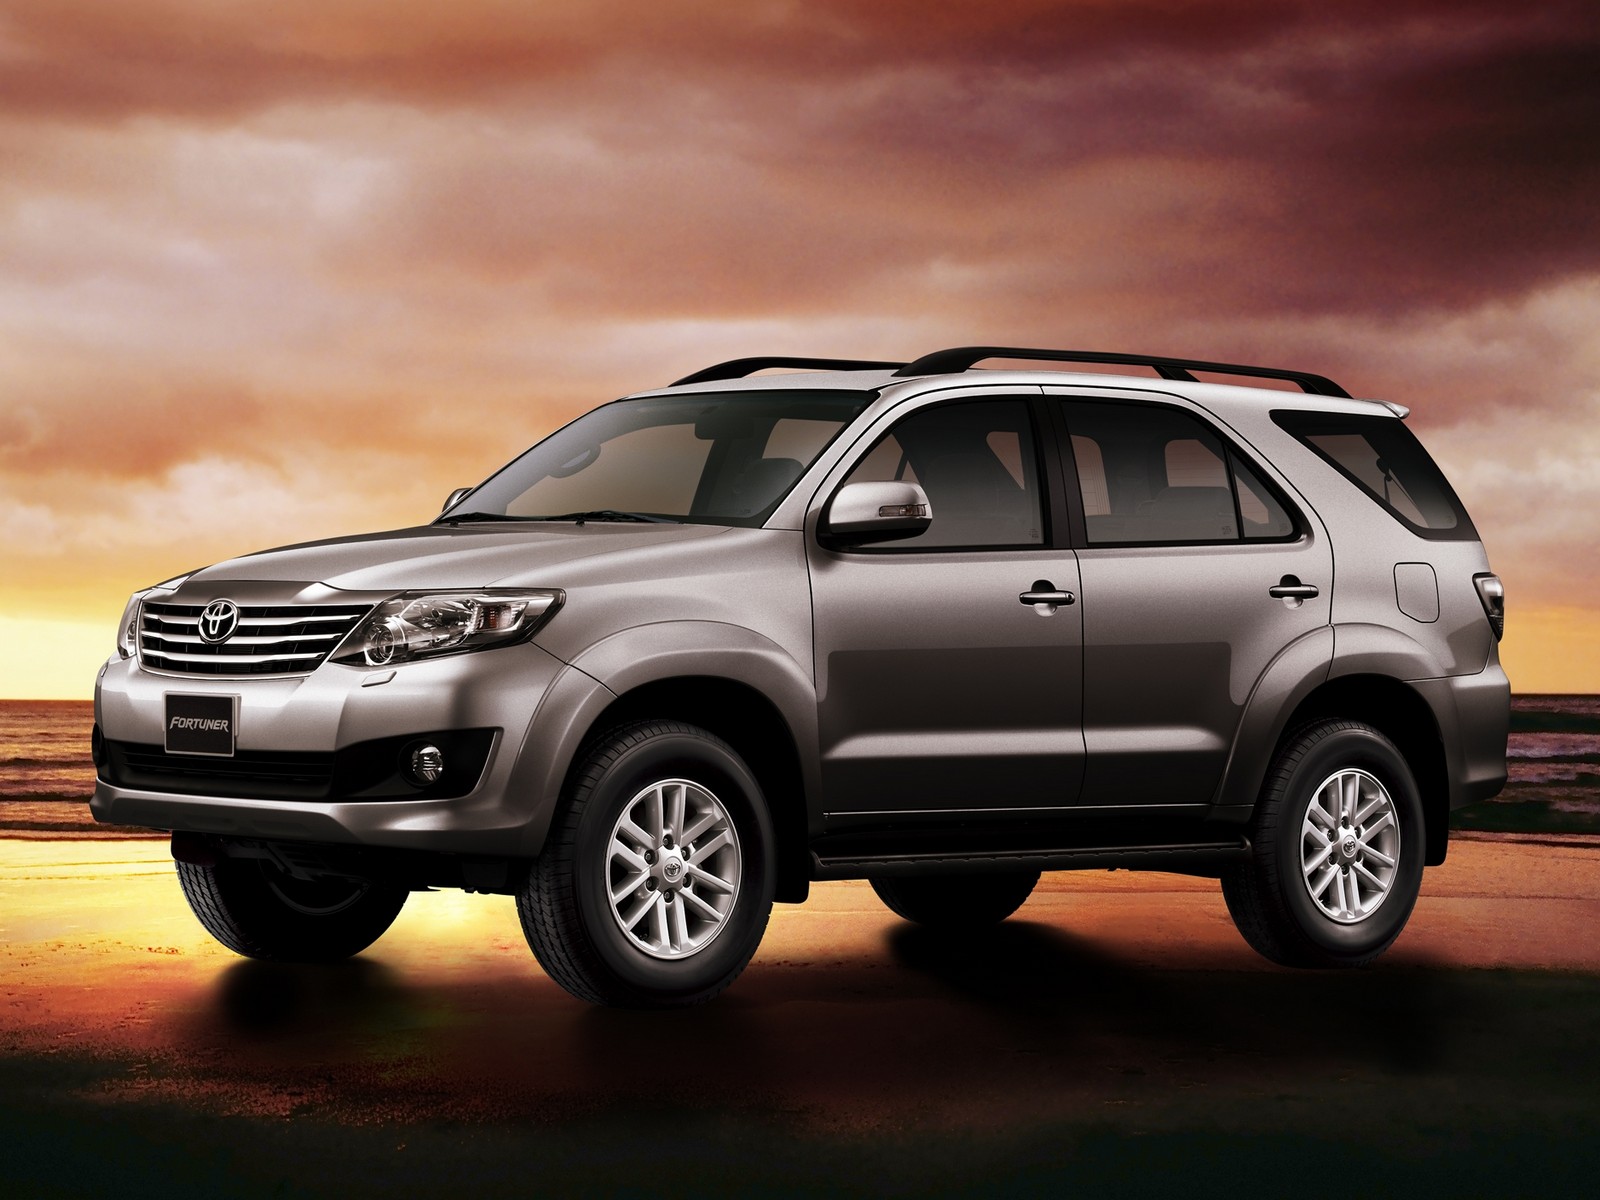 Free download Toyota Fortuner Hd Wallpaper Toyota Fortuner 2015 Hd